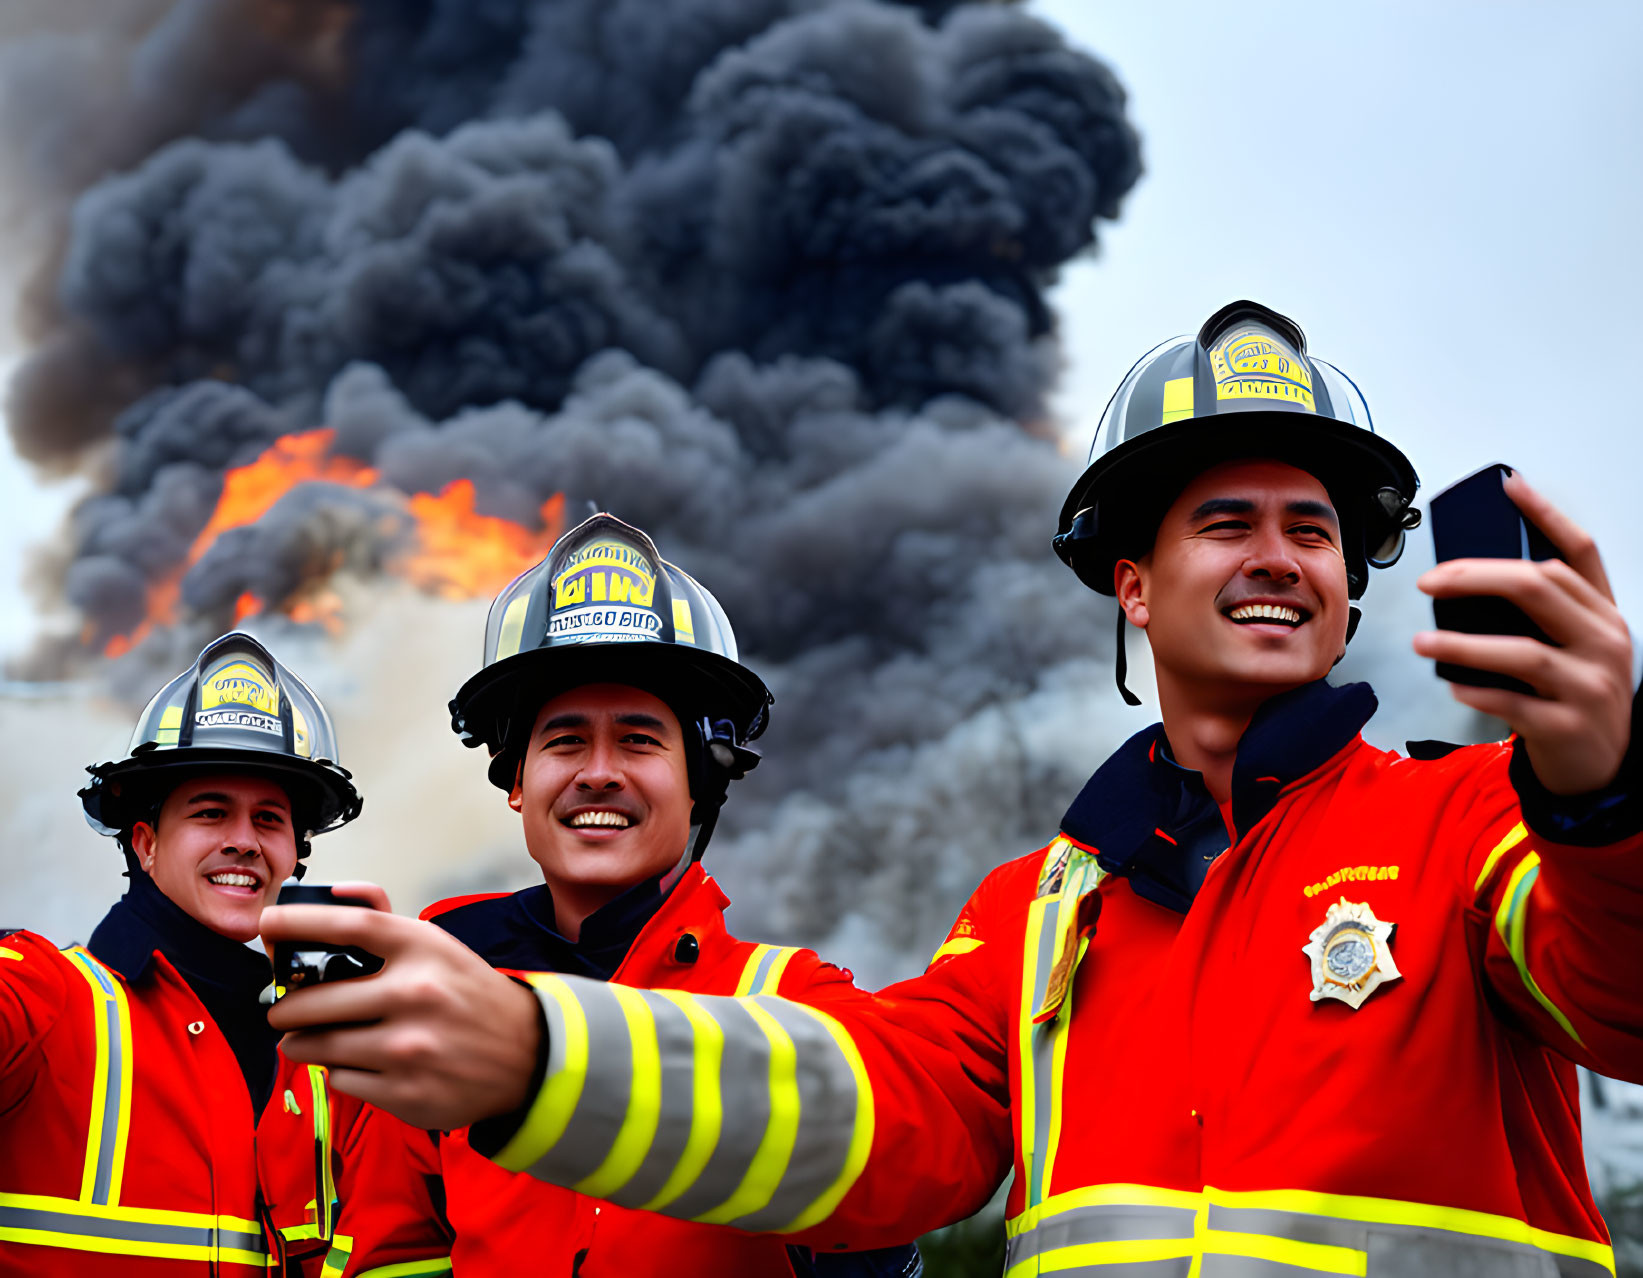 Three firefighters with helmets taking a selfie in front of a large fire and smoke